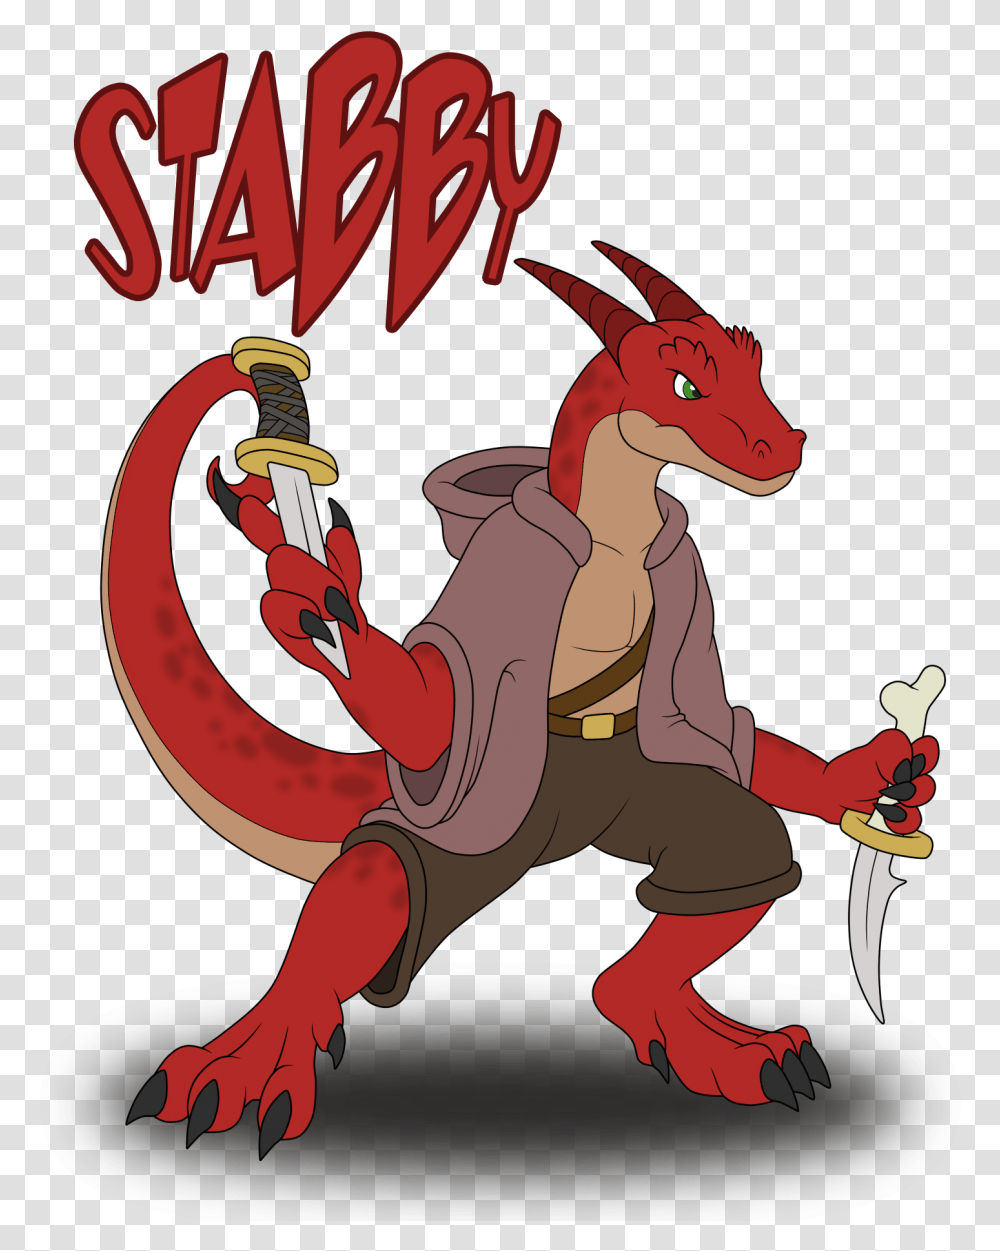 Ocdrew My Friend's Kobold Rogue For His Birthday Dnd Dragon, Animal Transparent Png